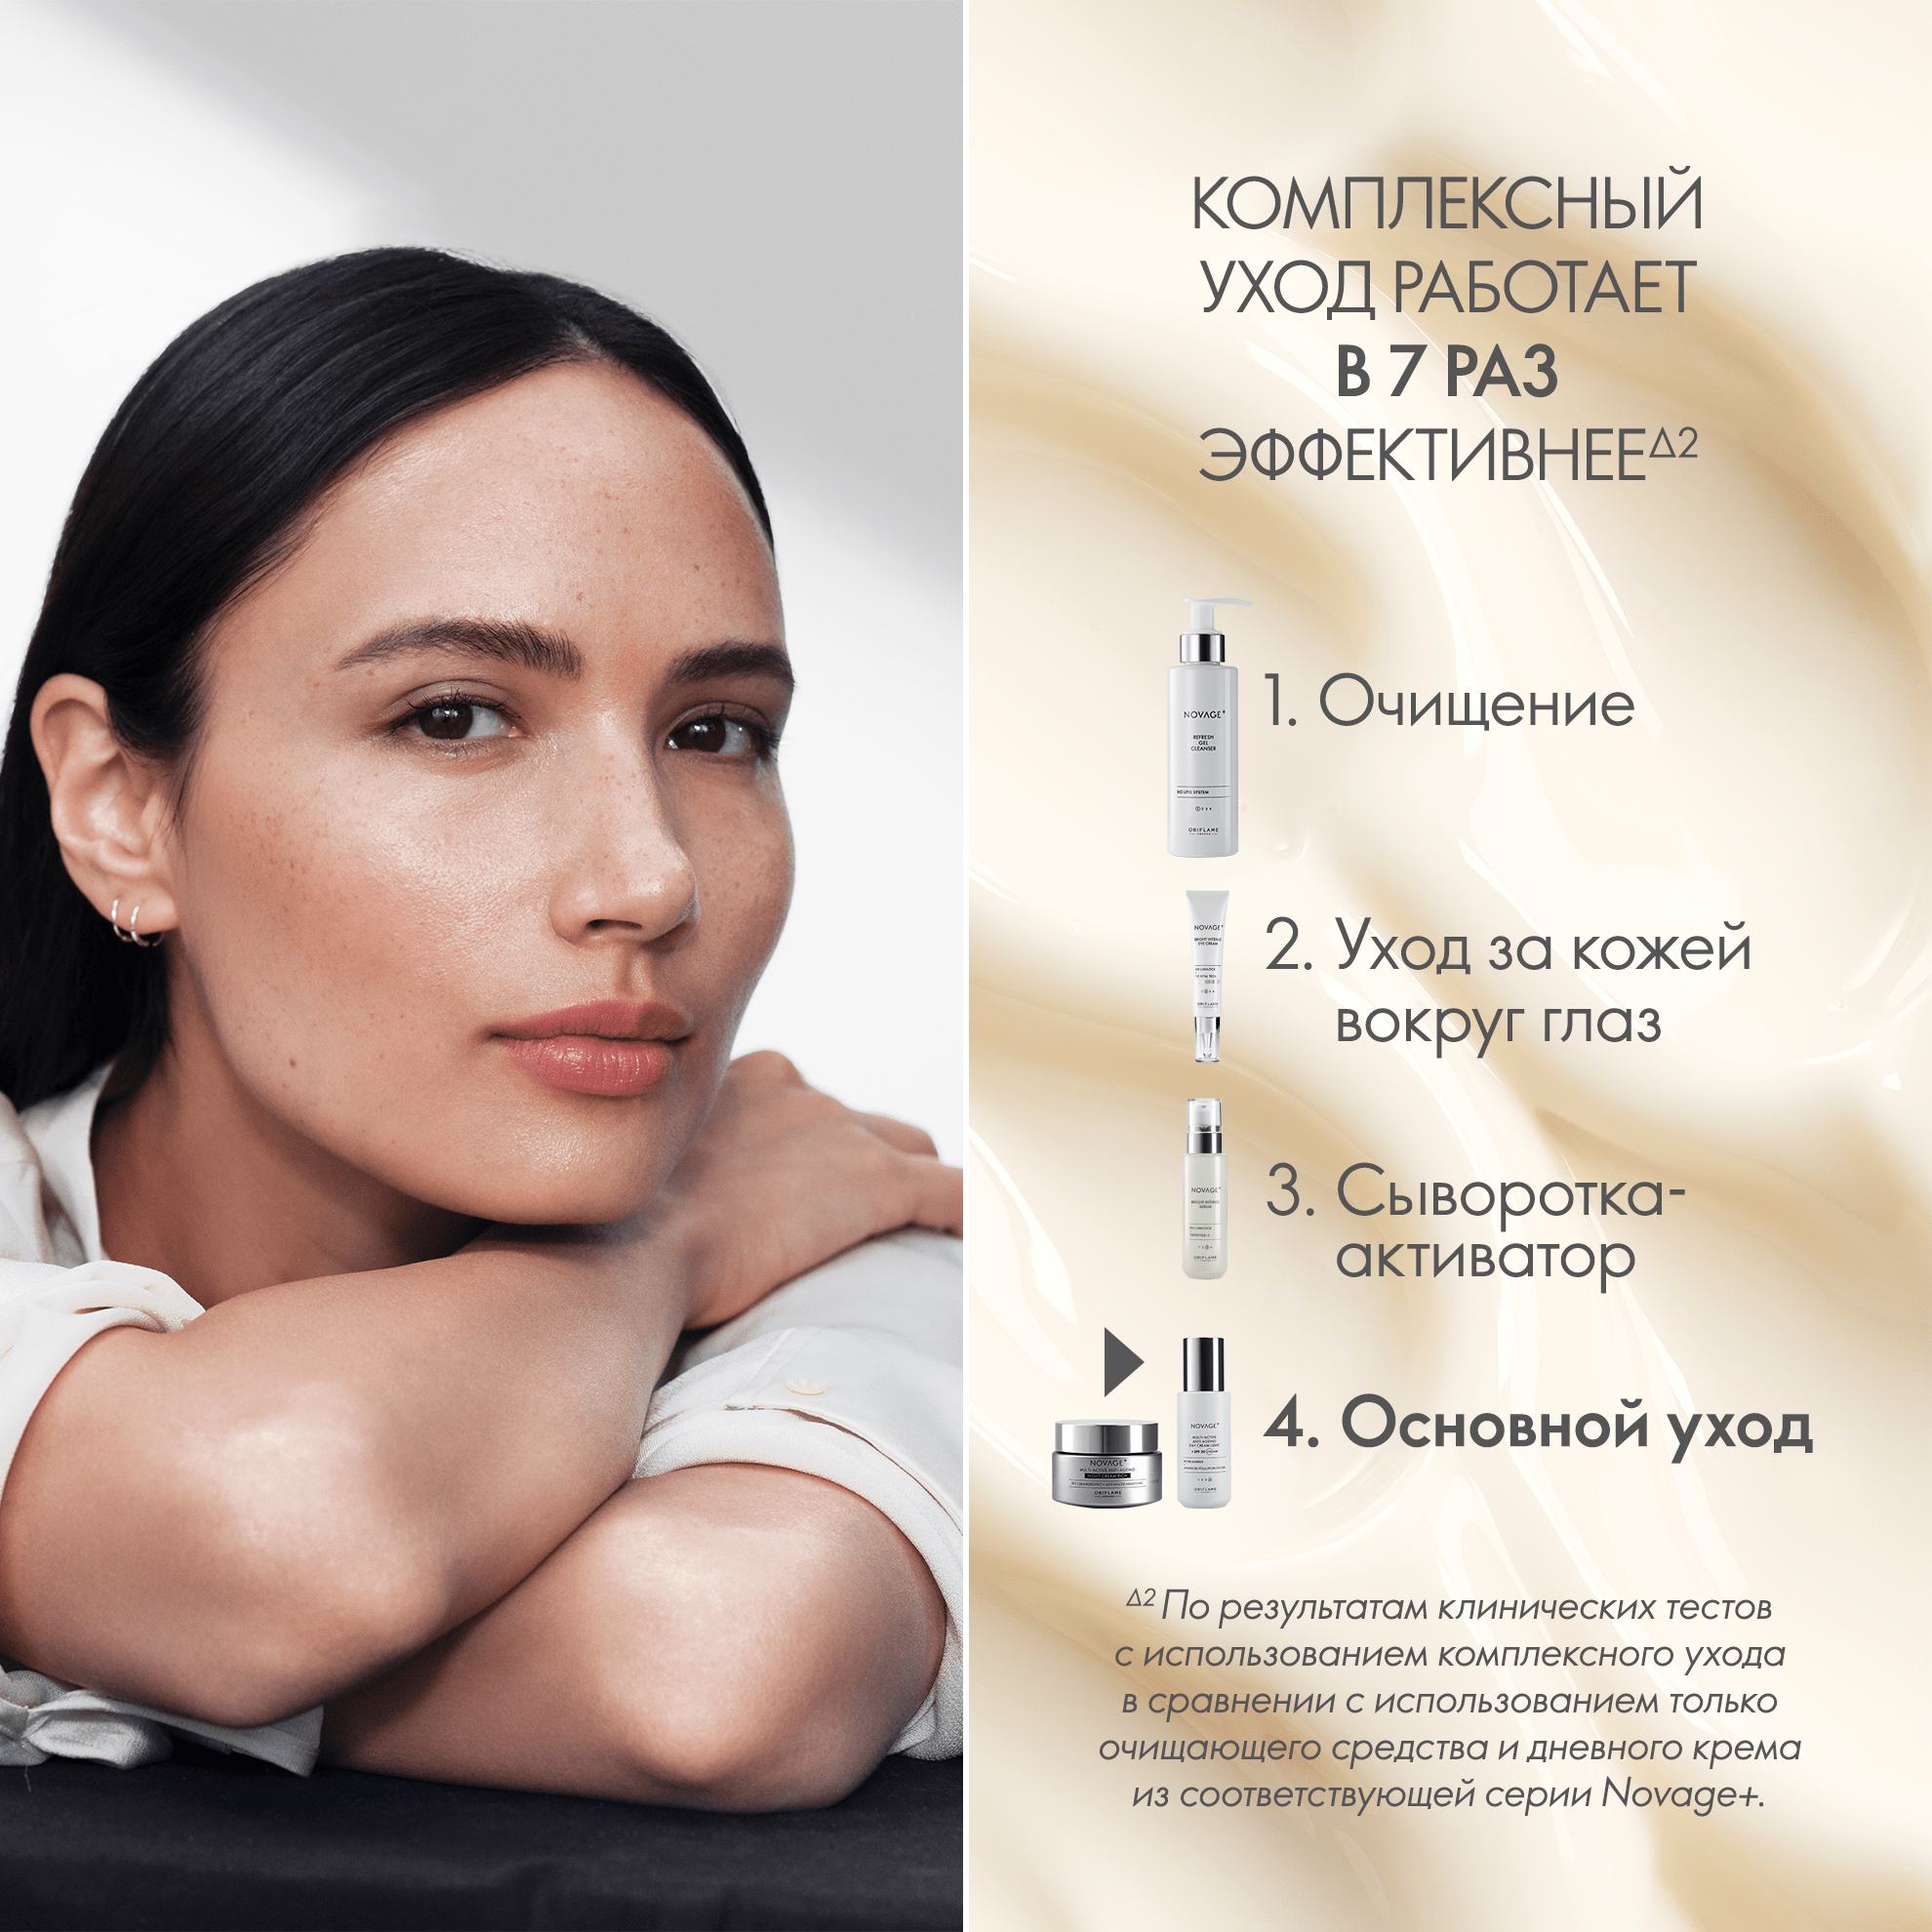 https://media-cdn.oriflame.com/productImage?externalMediaId=product-management-media%2fProducts%2f41047%2fRU%2f41047_9.png&id=19151082&version=1